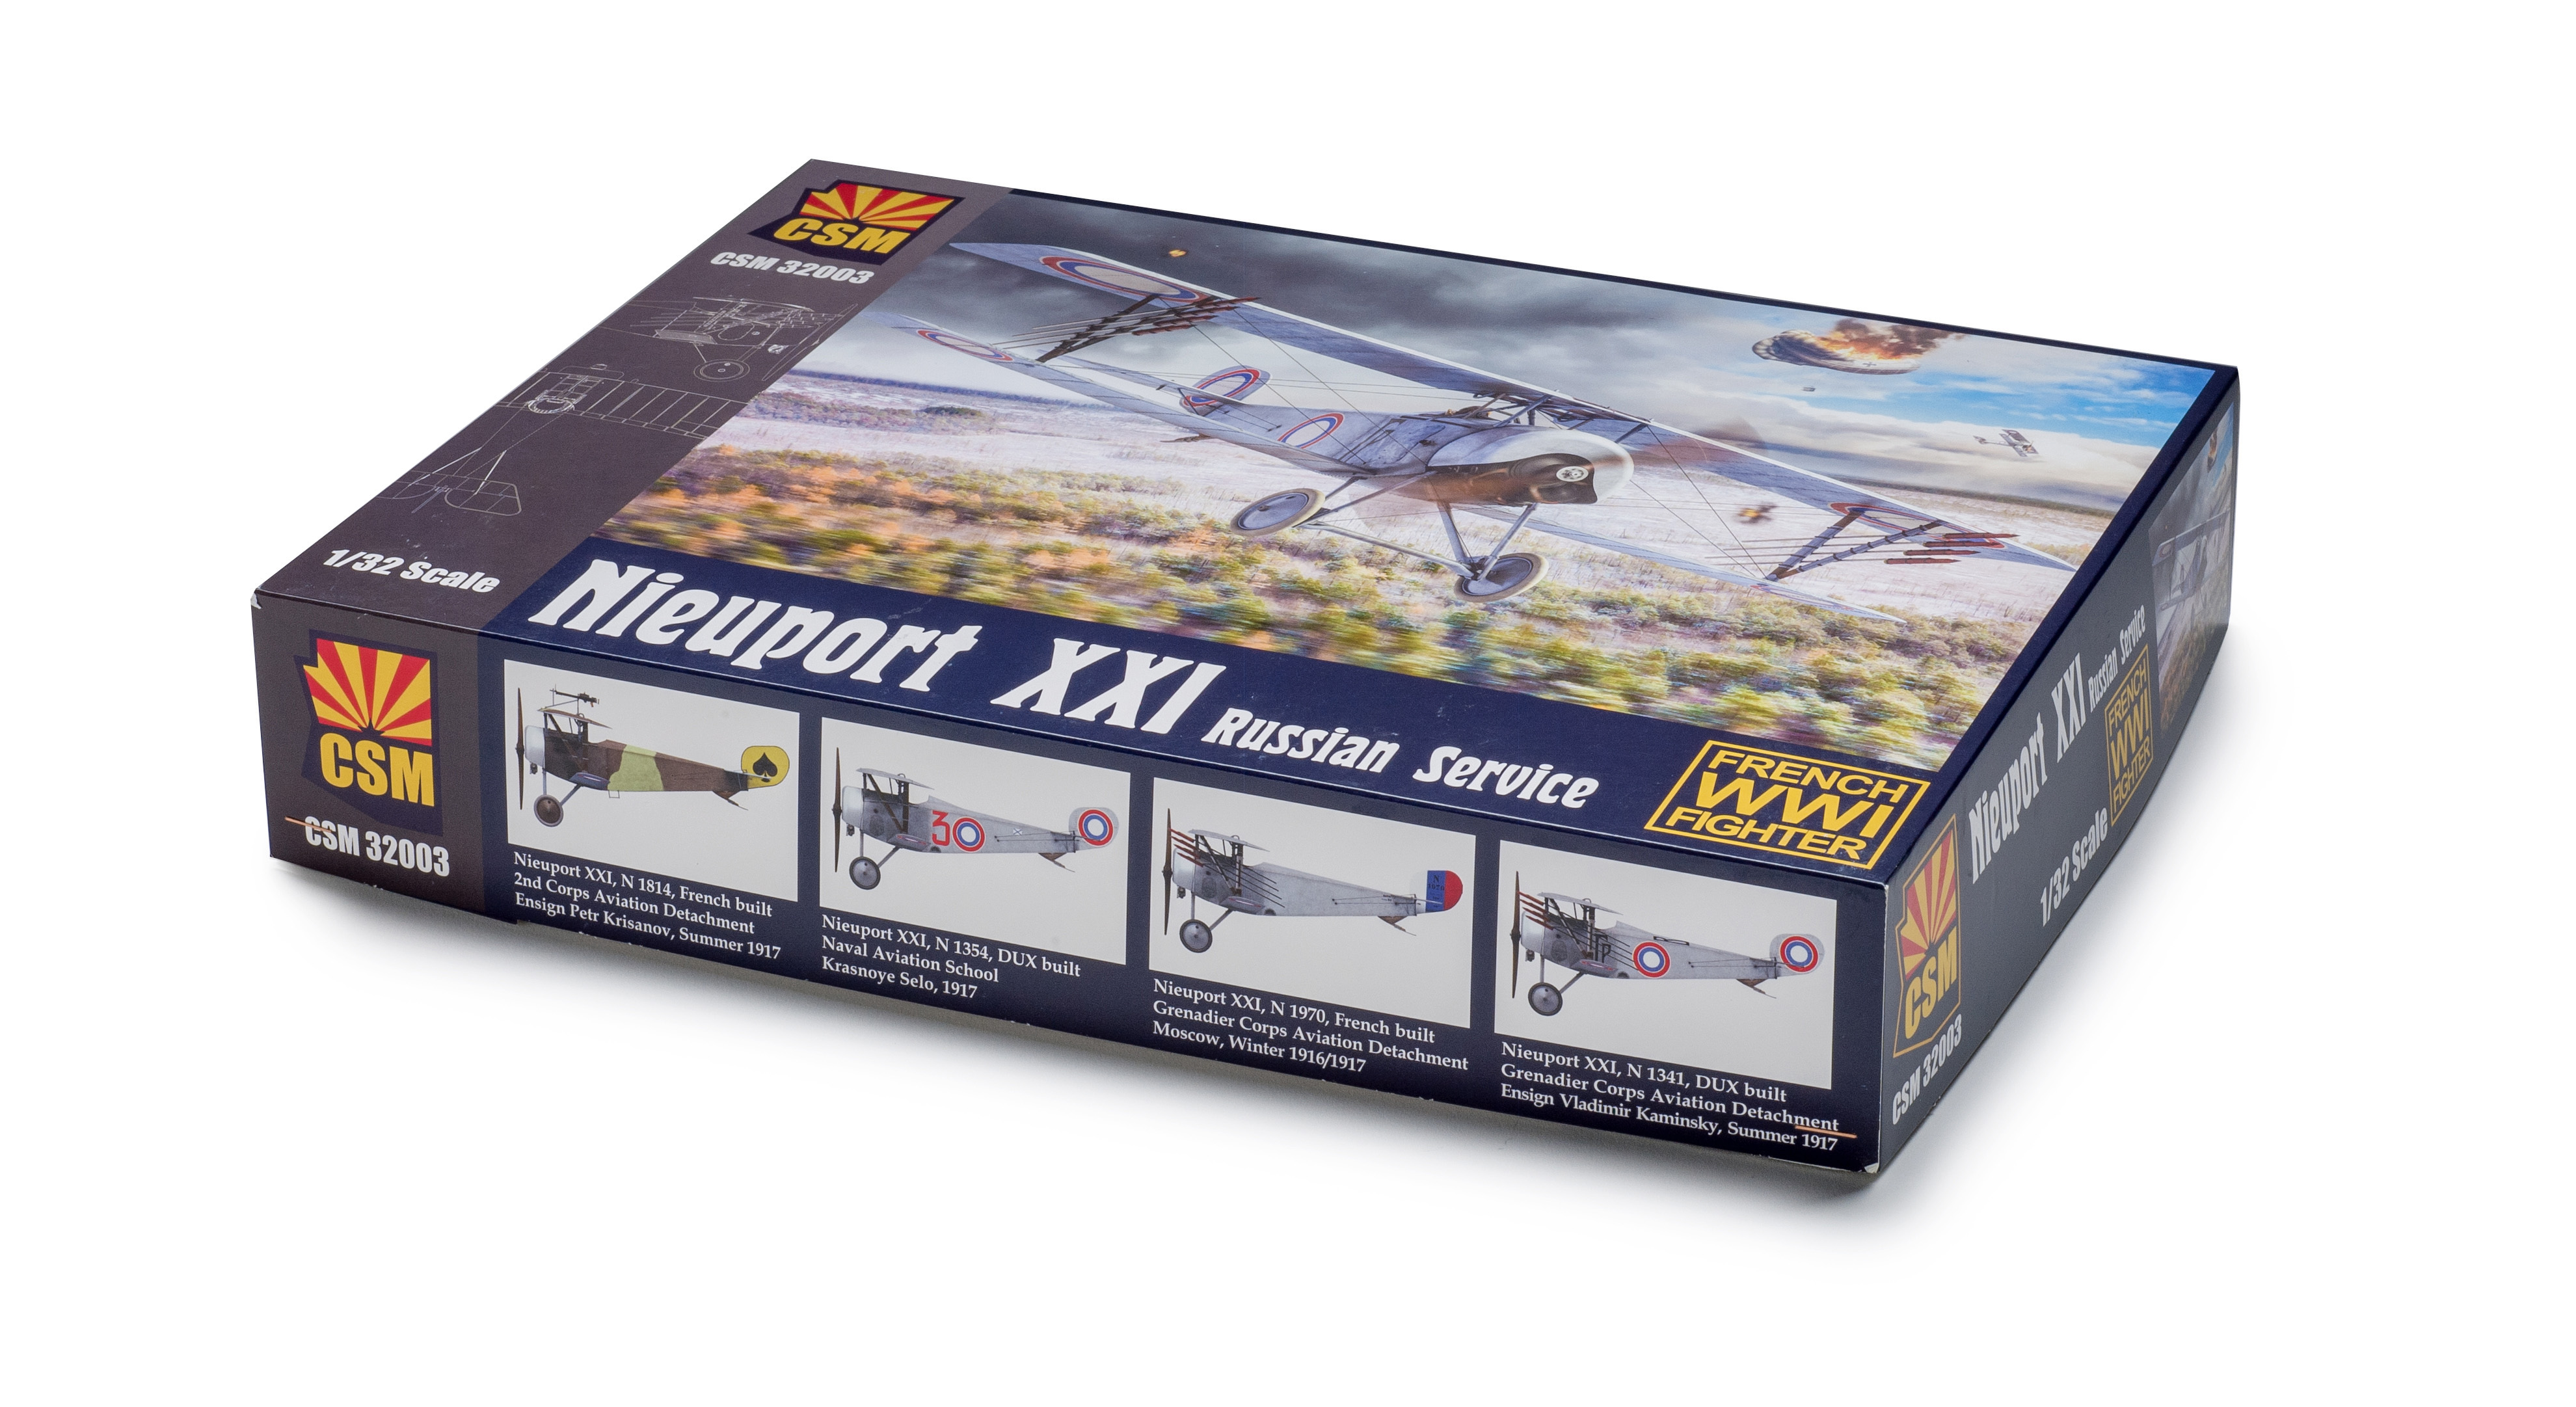 Build review of the Copper State Models Nieuport XXI scale model ...